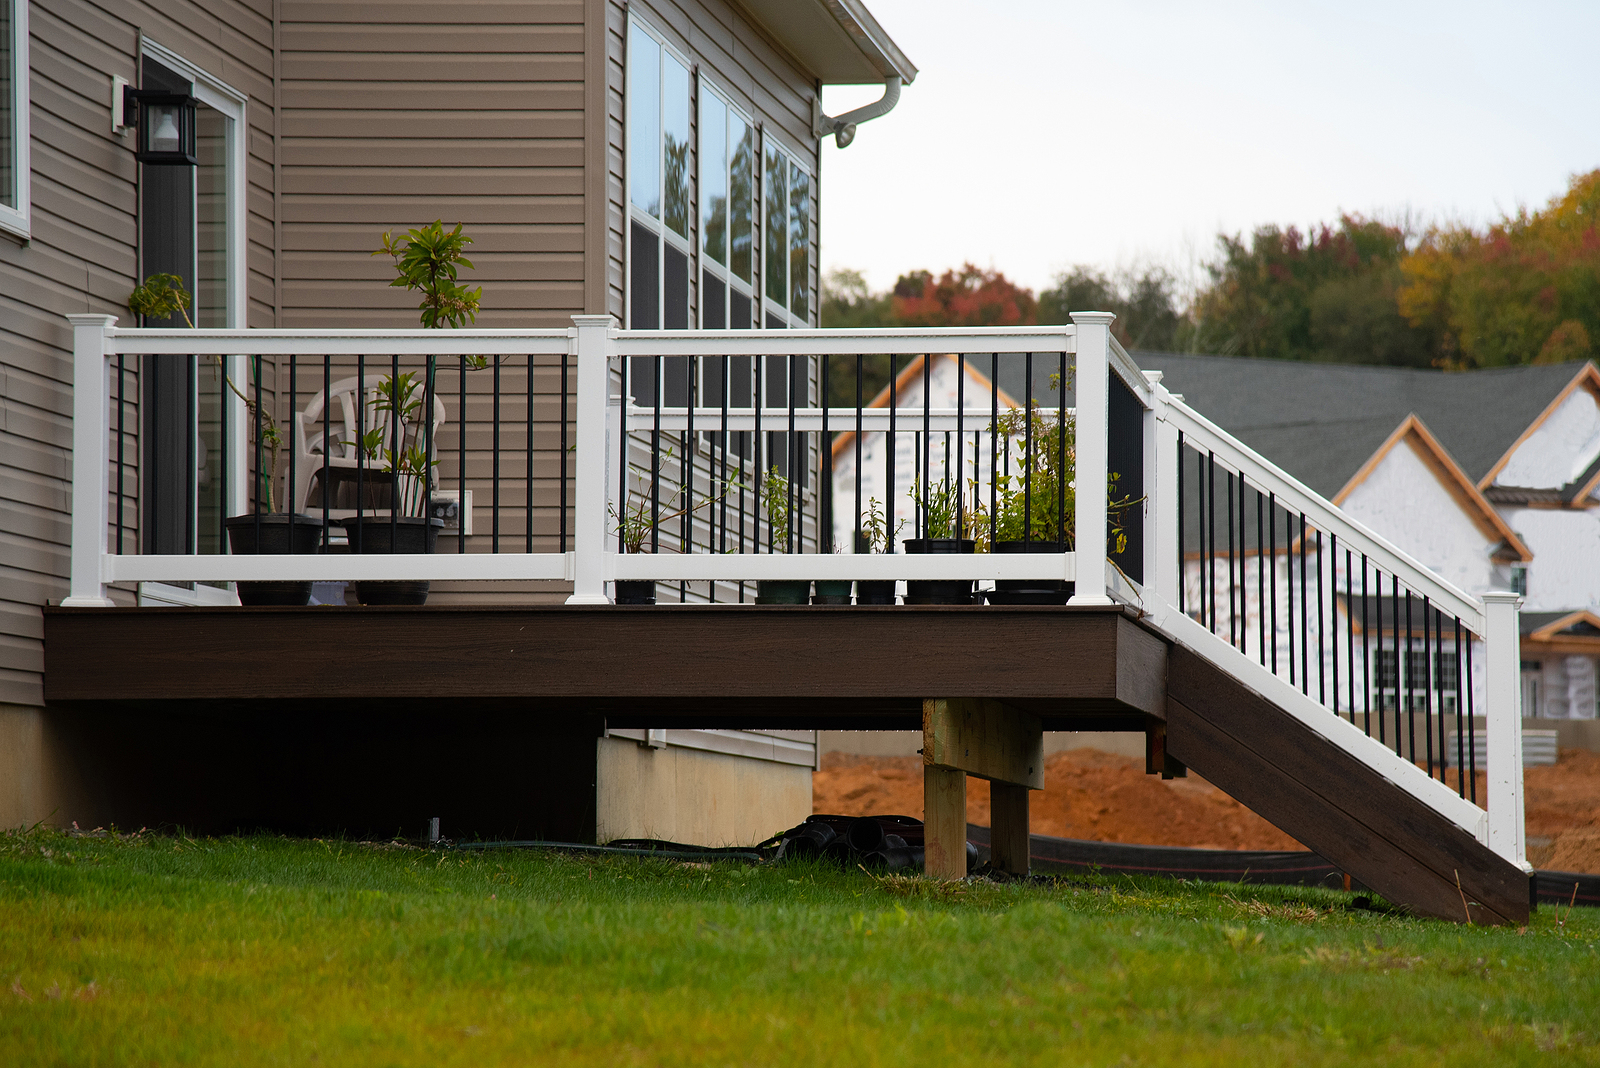 Inspect Your Deck To Keep Family And Friends Safe This Summer